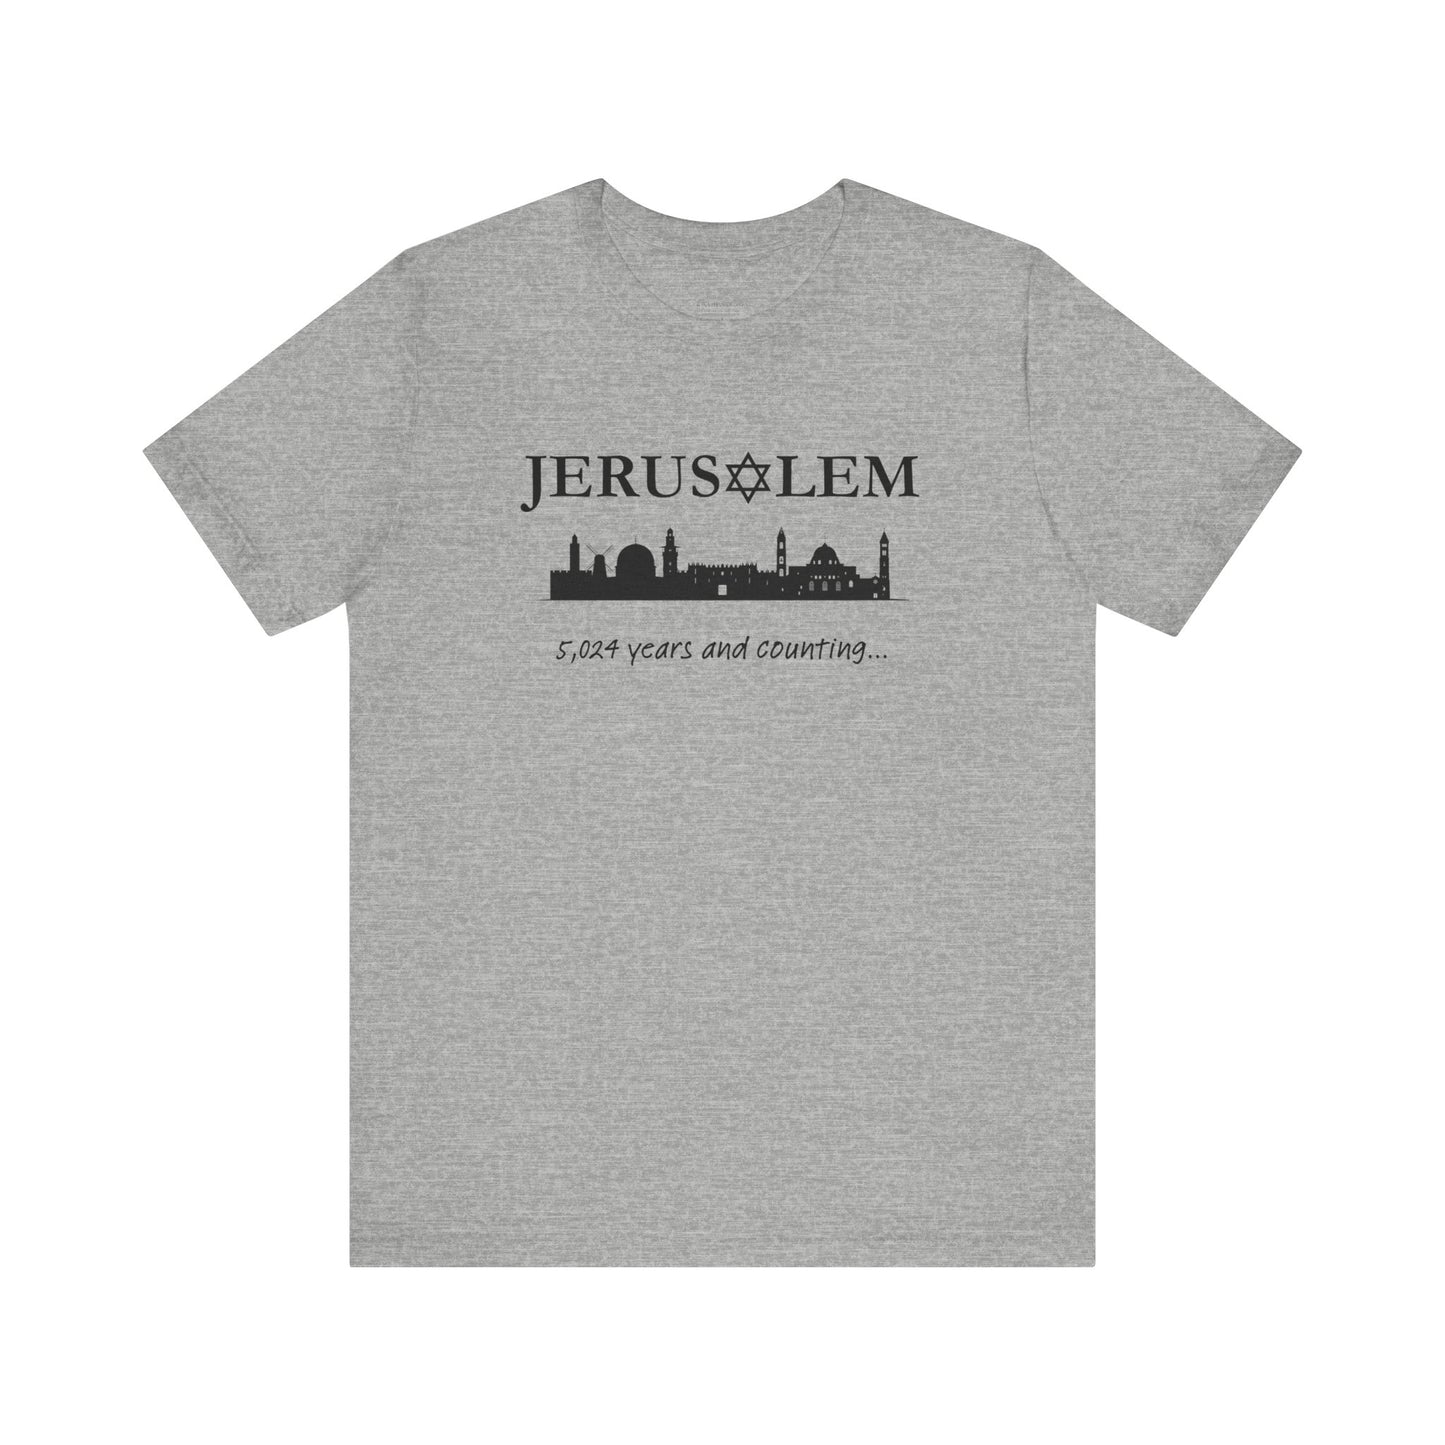 Jerusalem - 5,024 Years and Counting T-shirt